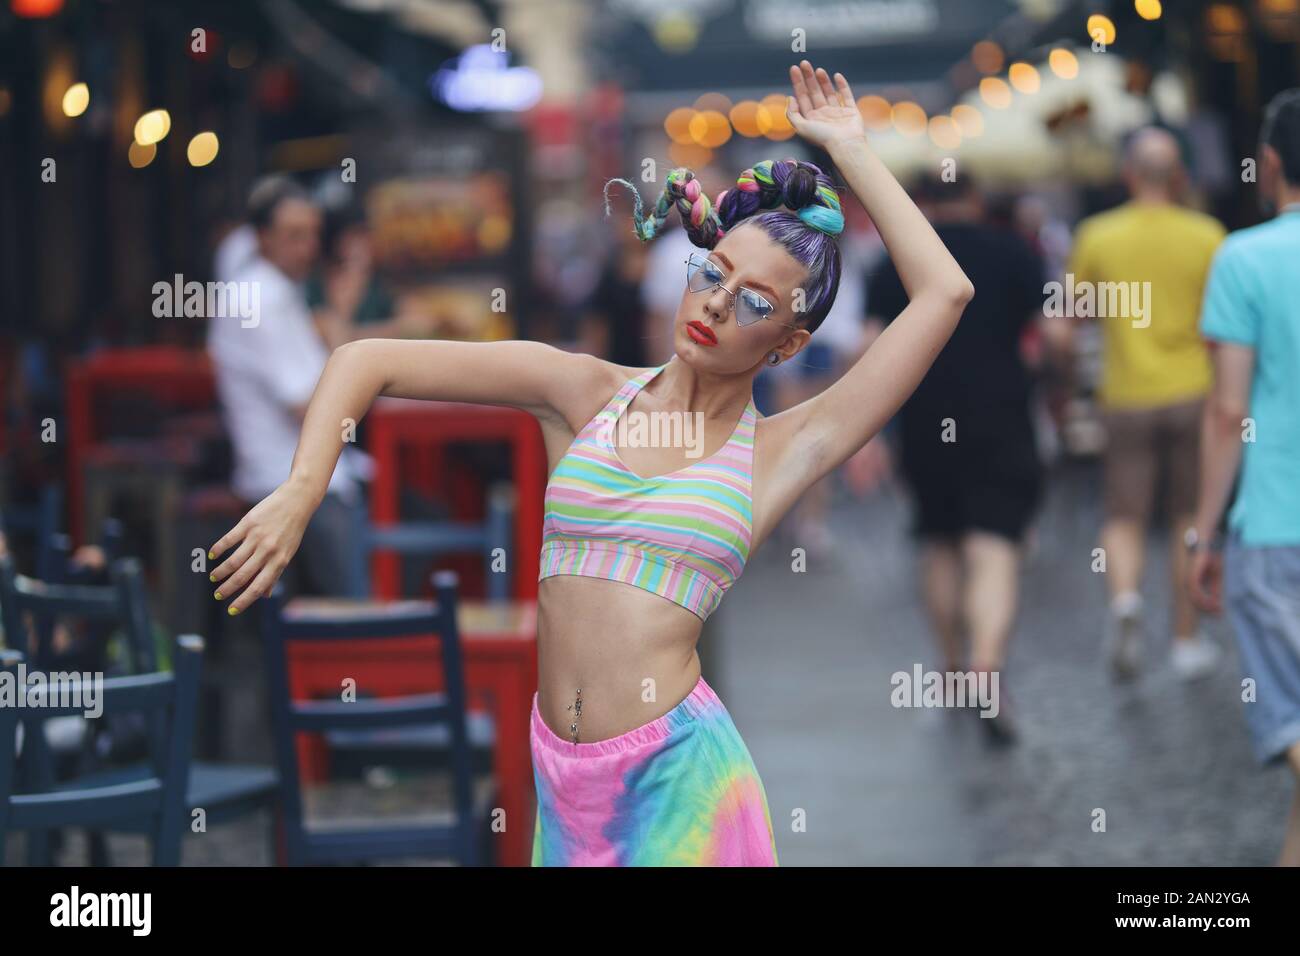 Eccentric Young Woman dancing in the middle of a crowded Street - Freedom concept Stock Photo